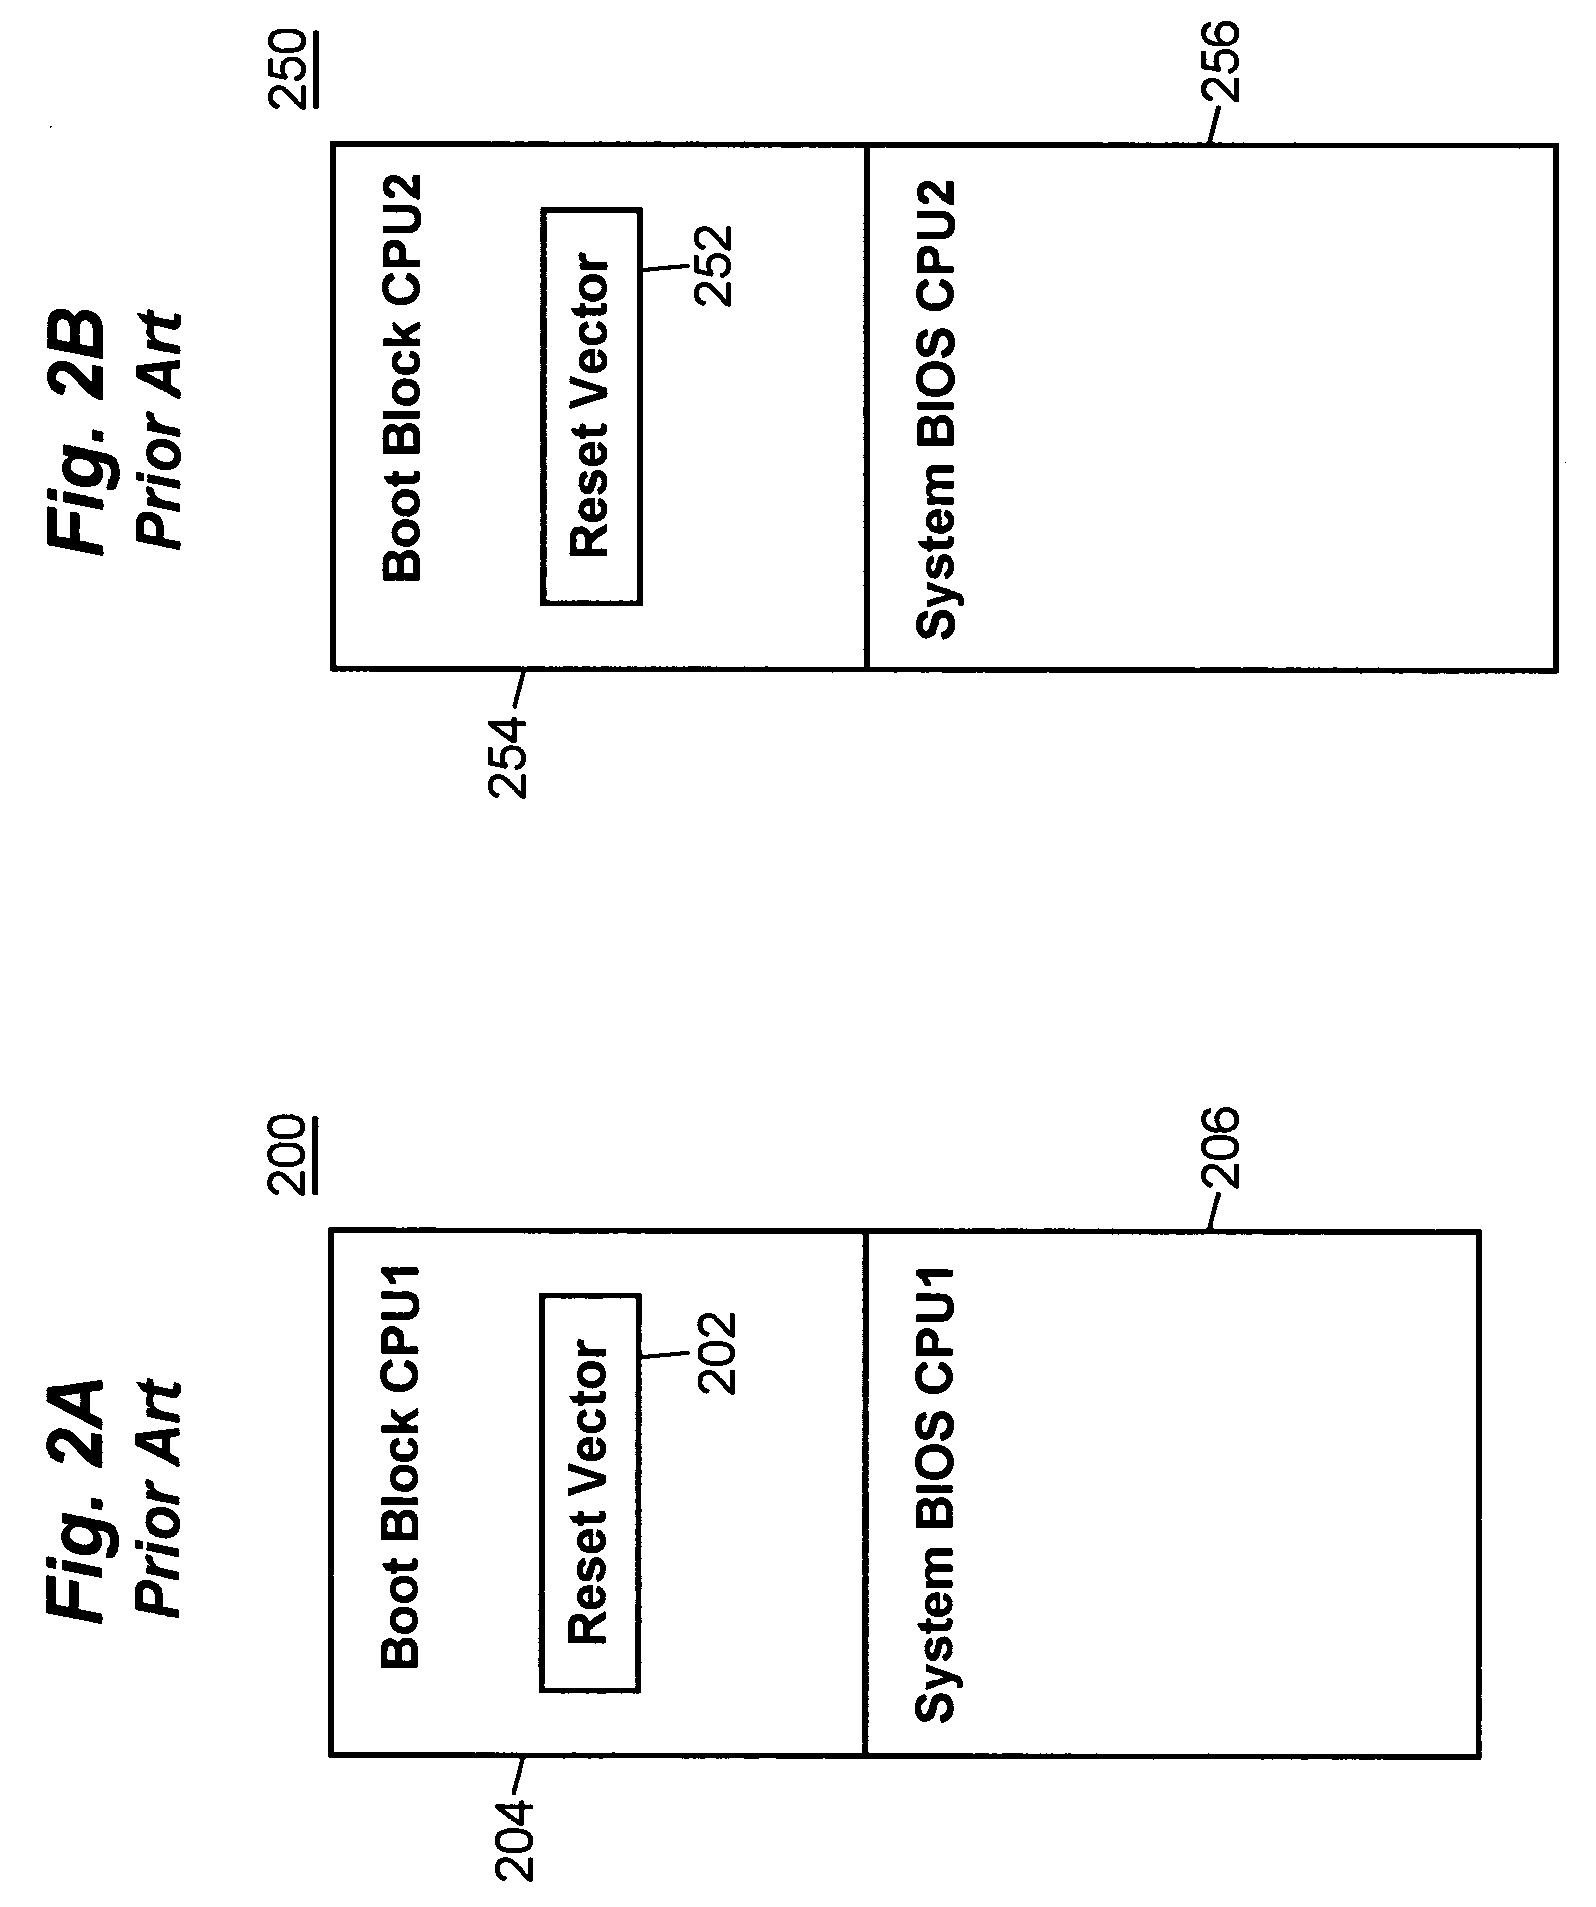 Interleaved boot block to support multiple processor architectures and method of use